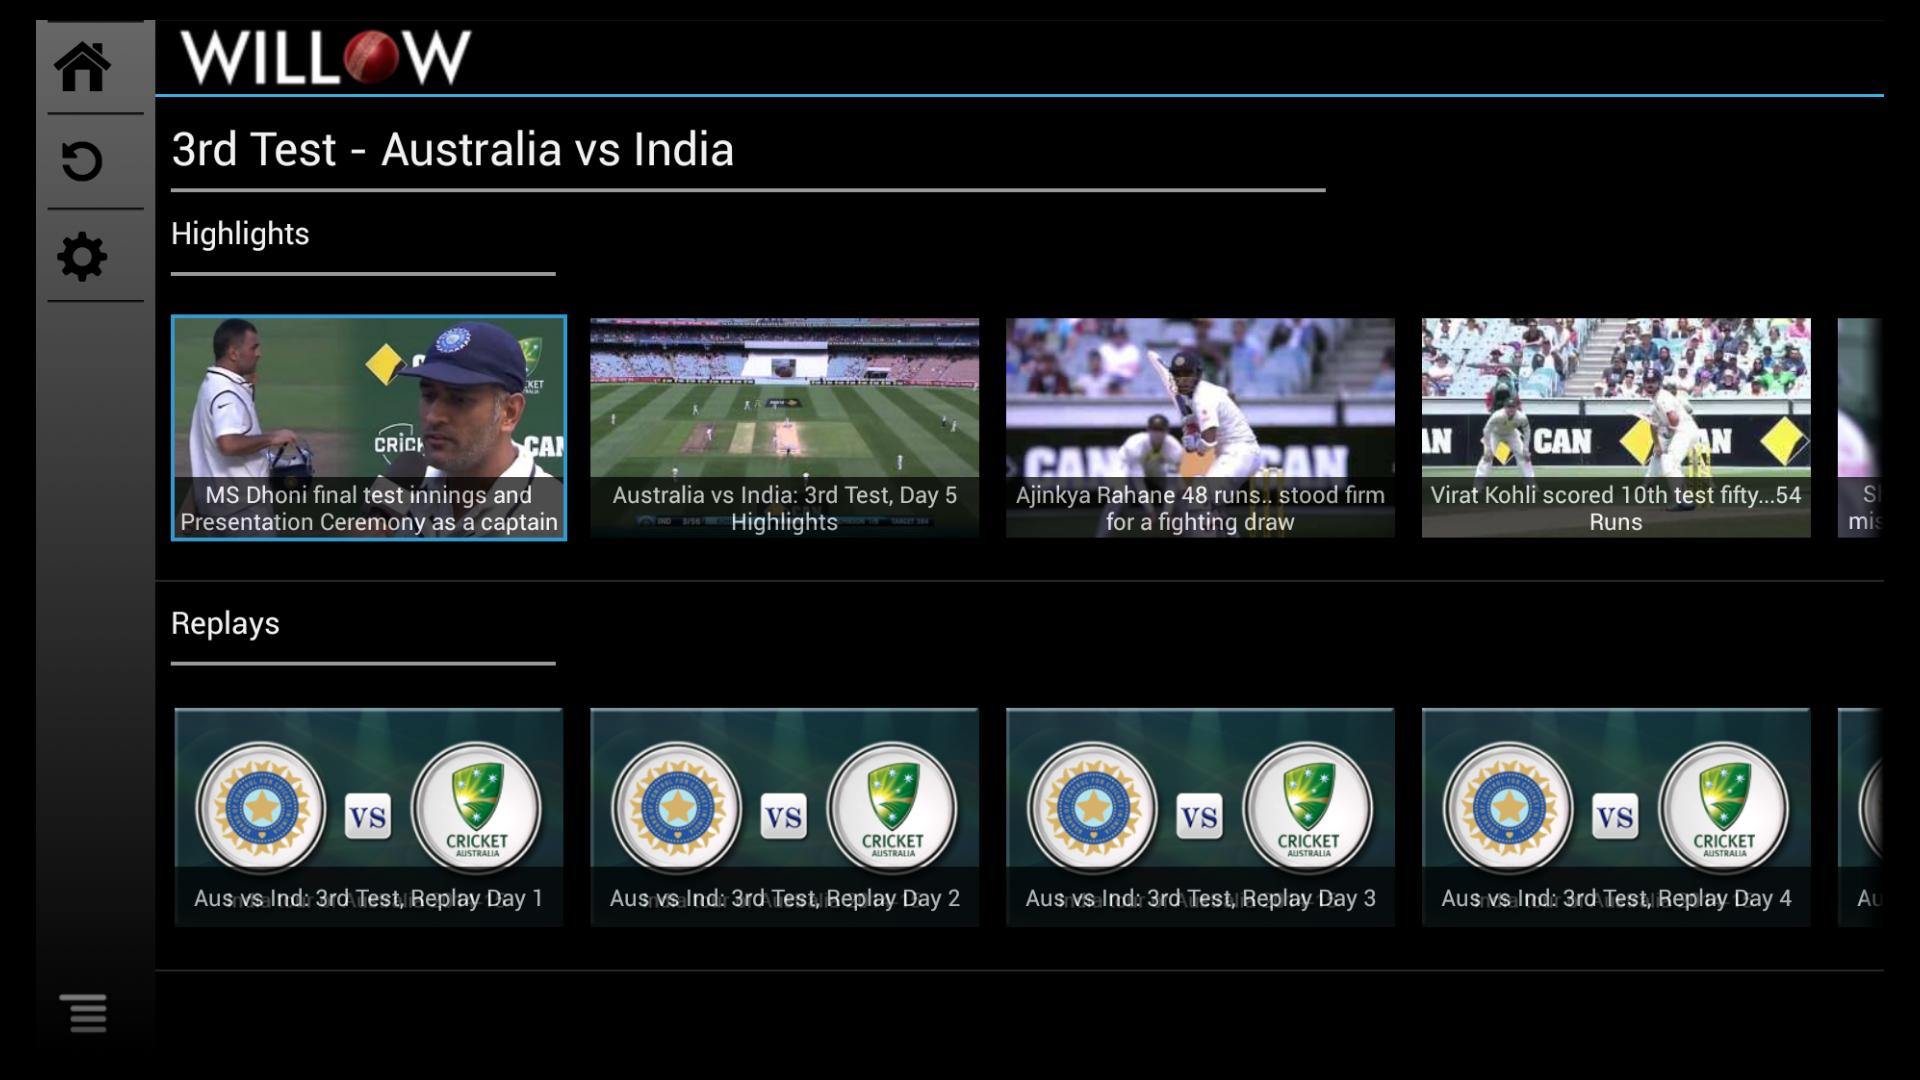 Watch live cricket on Apple TV using the Willow app